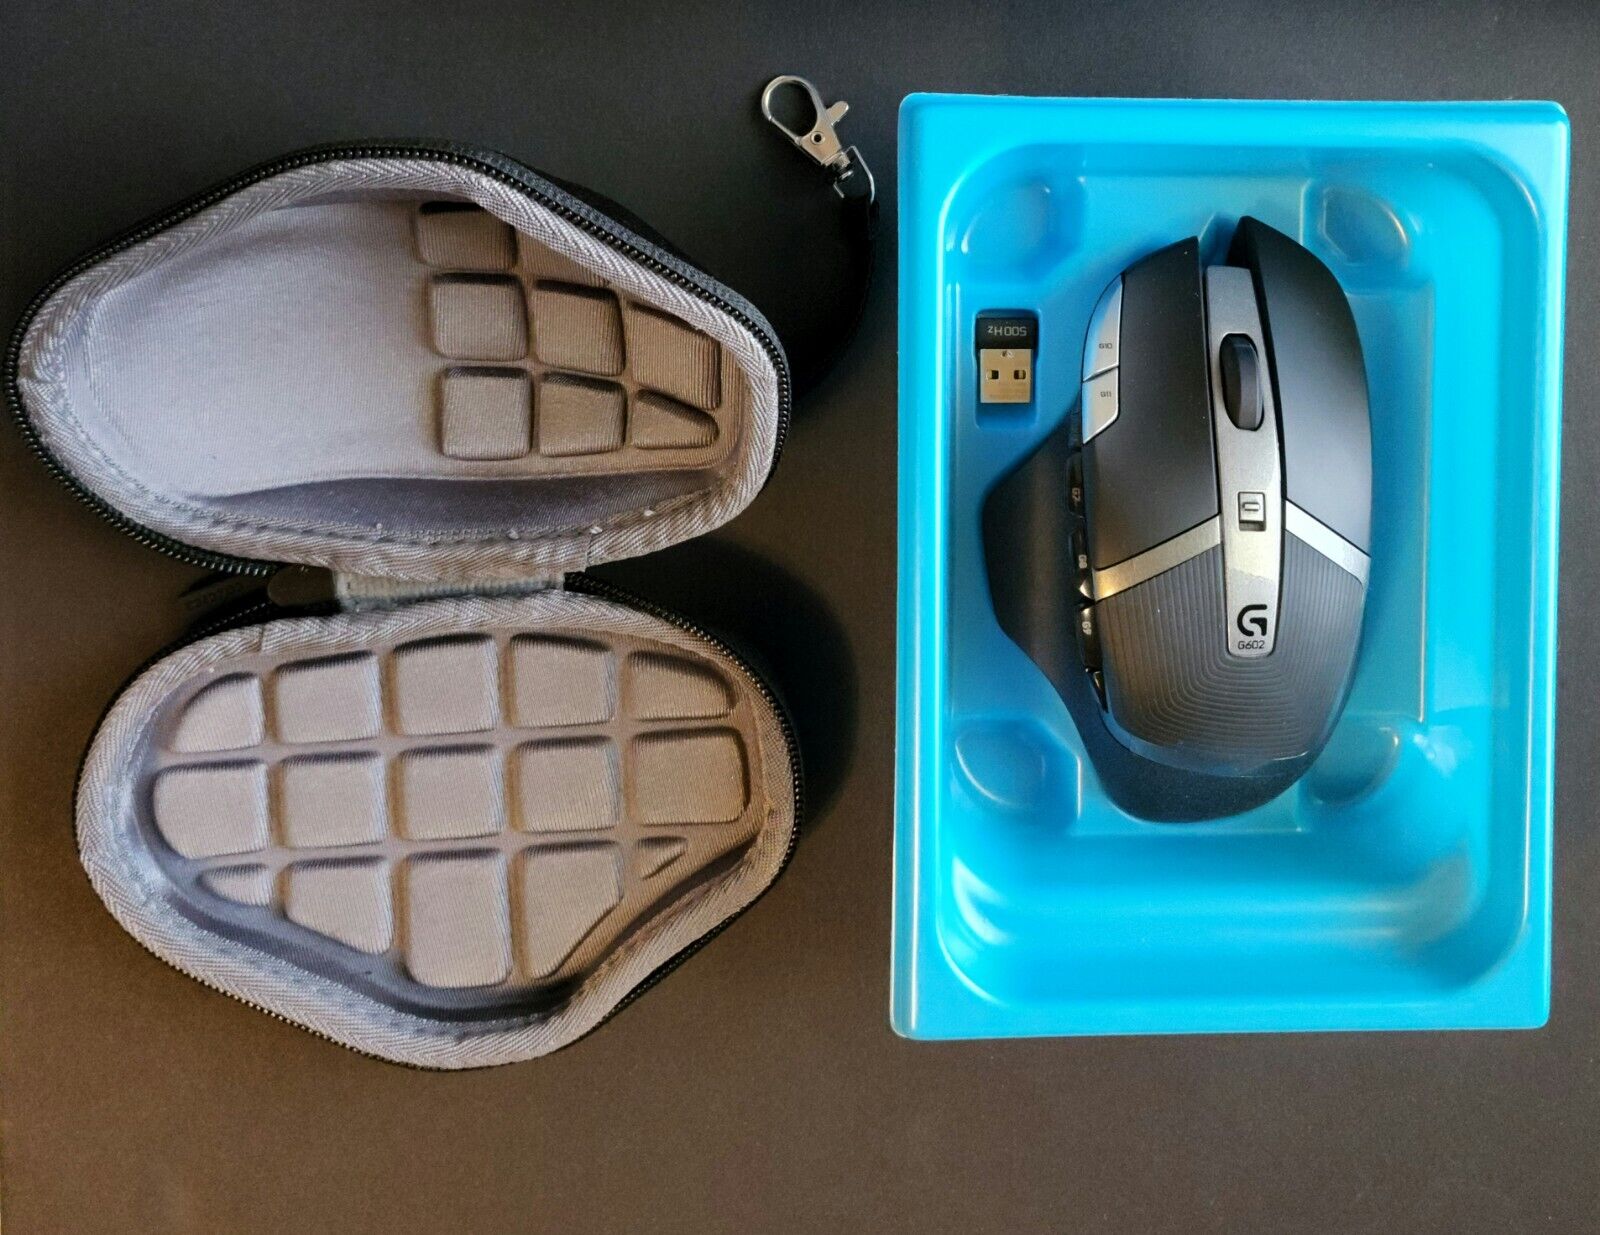 Logitech G602 (910-003820) Wireless Gaming Mouse + Travel Case